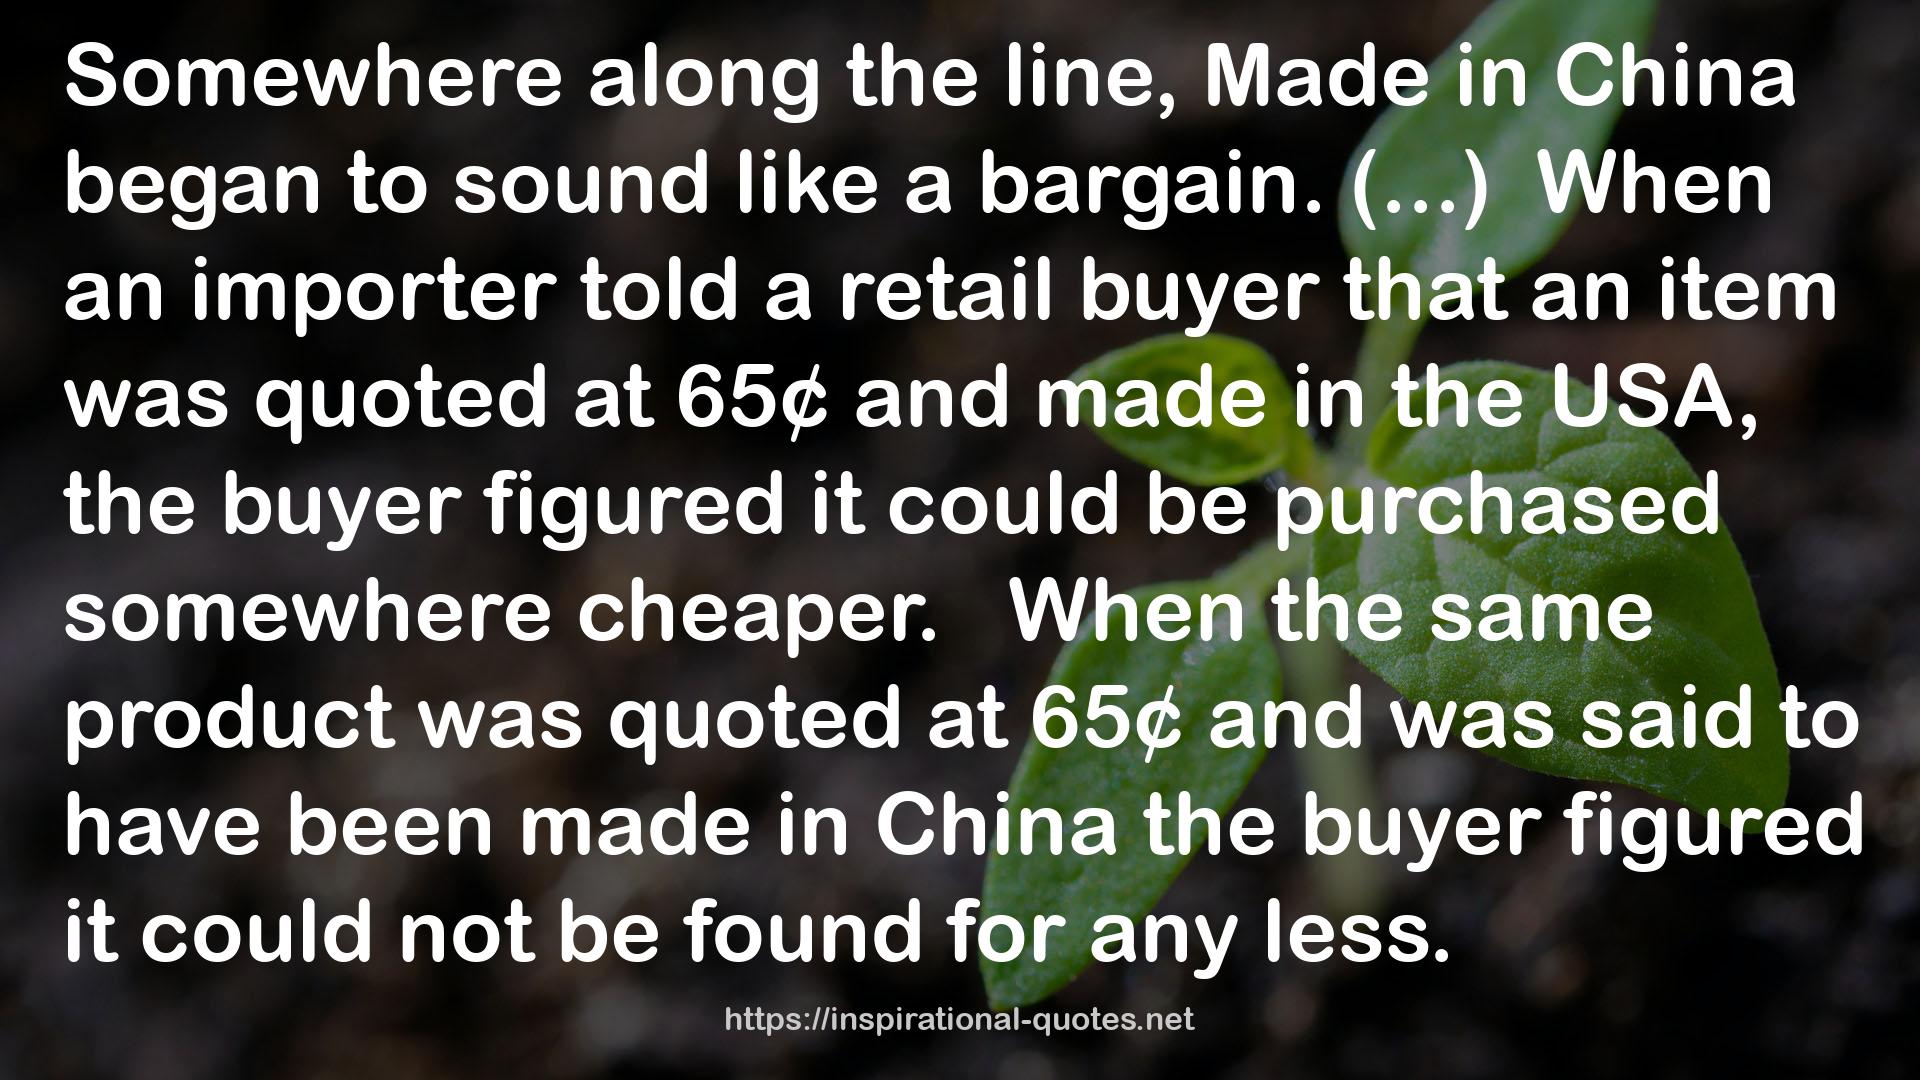 Poorly Made in China: An Insider's Account of the Tactics Behind China's Production Game QUOTES